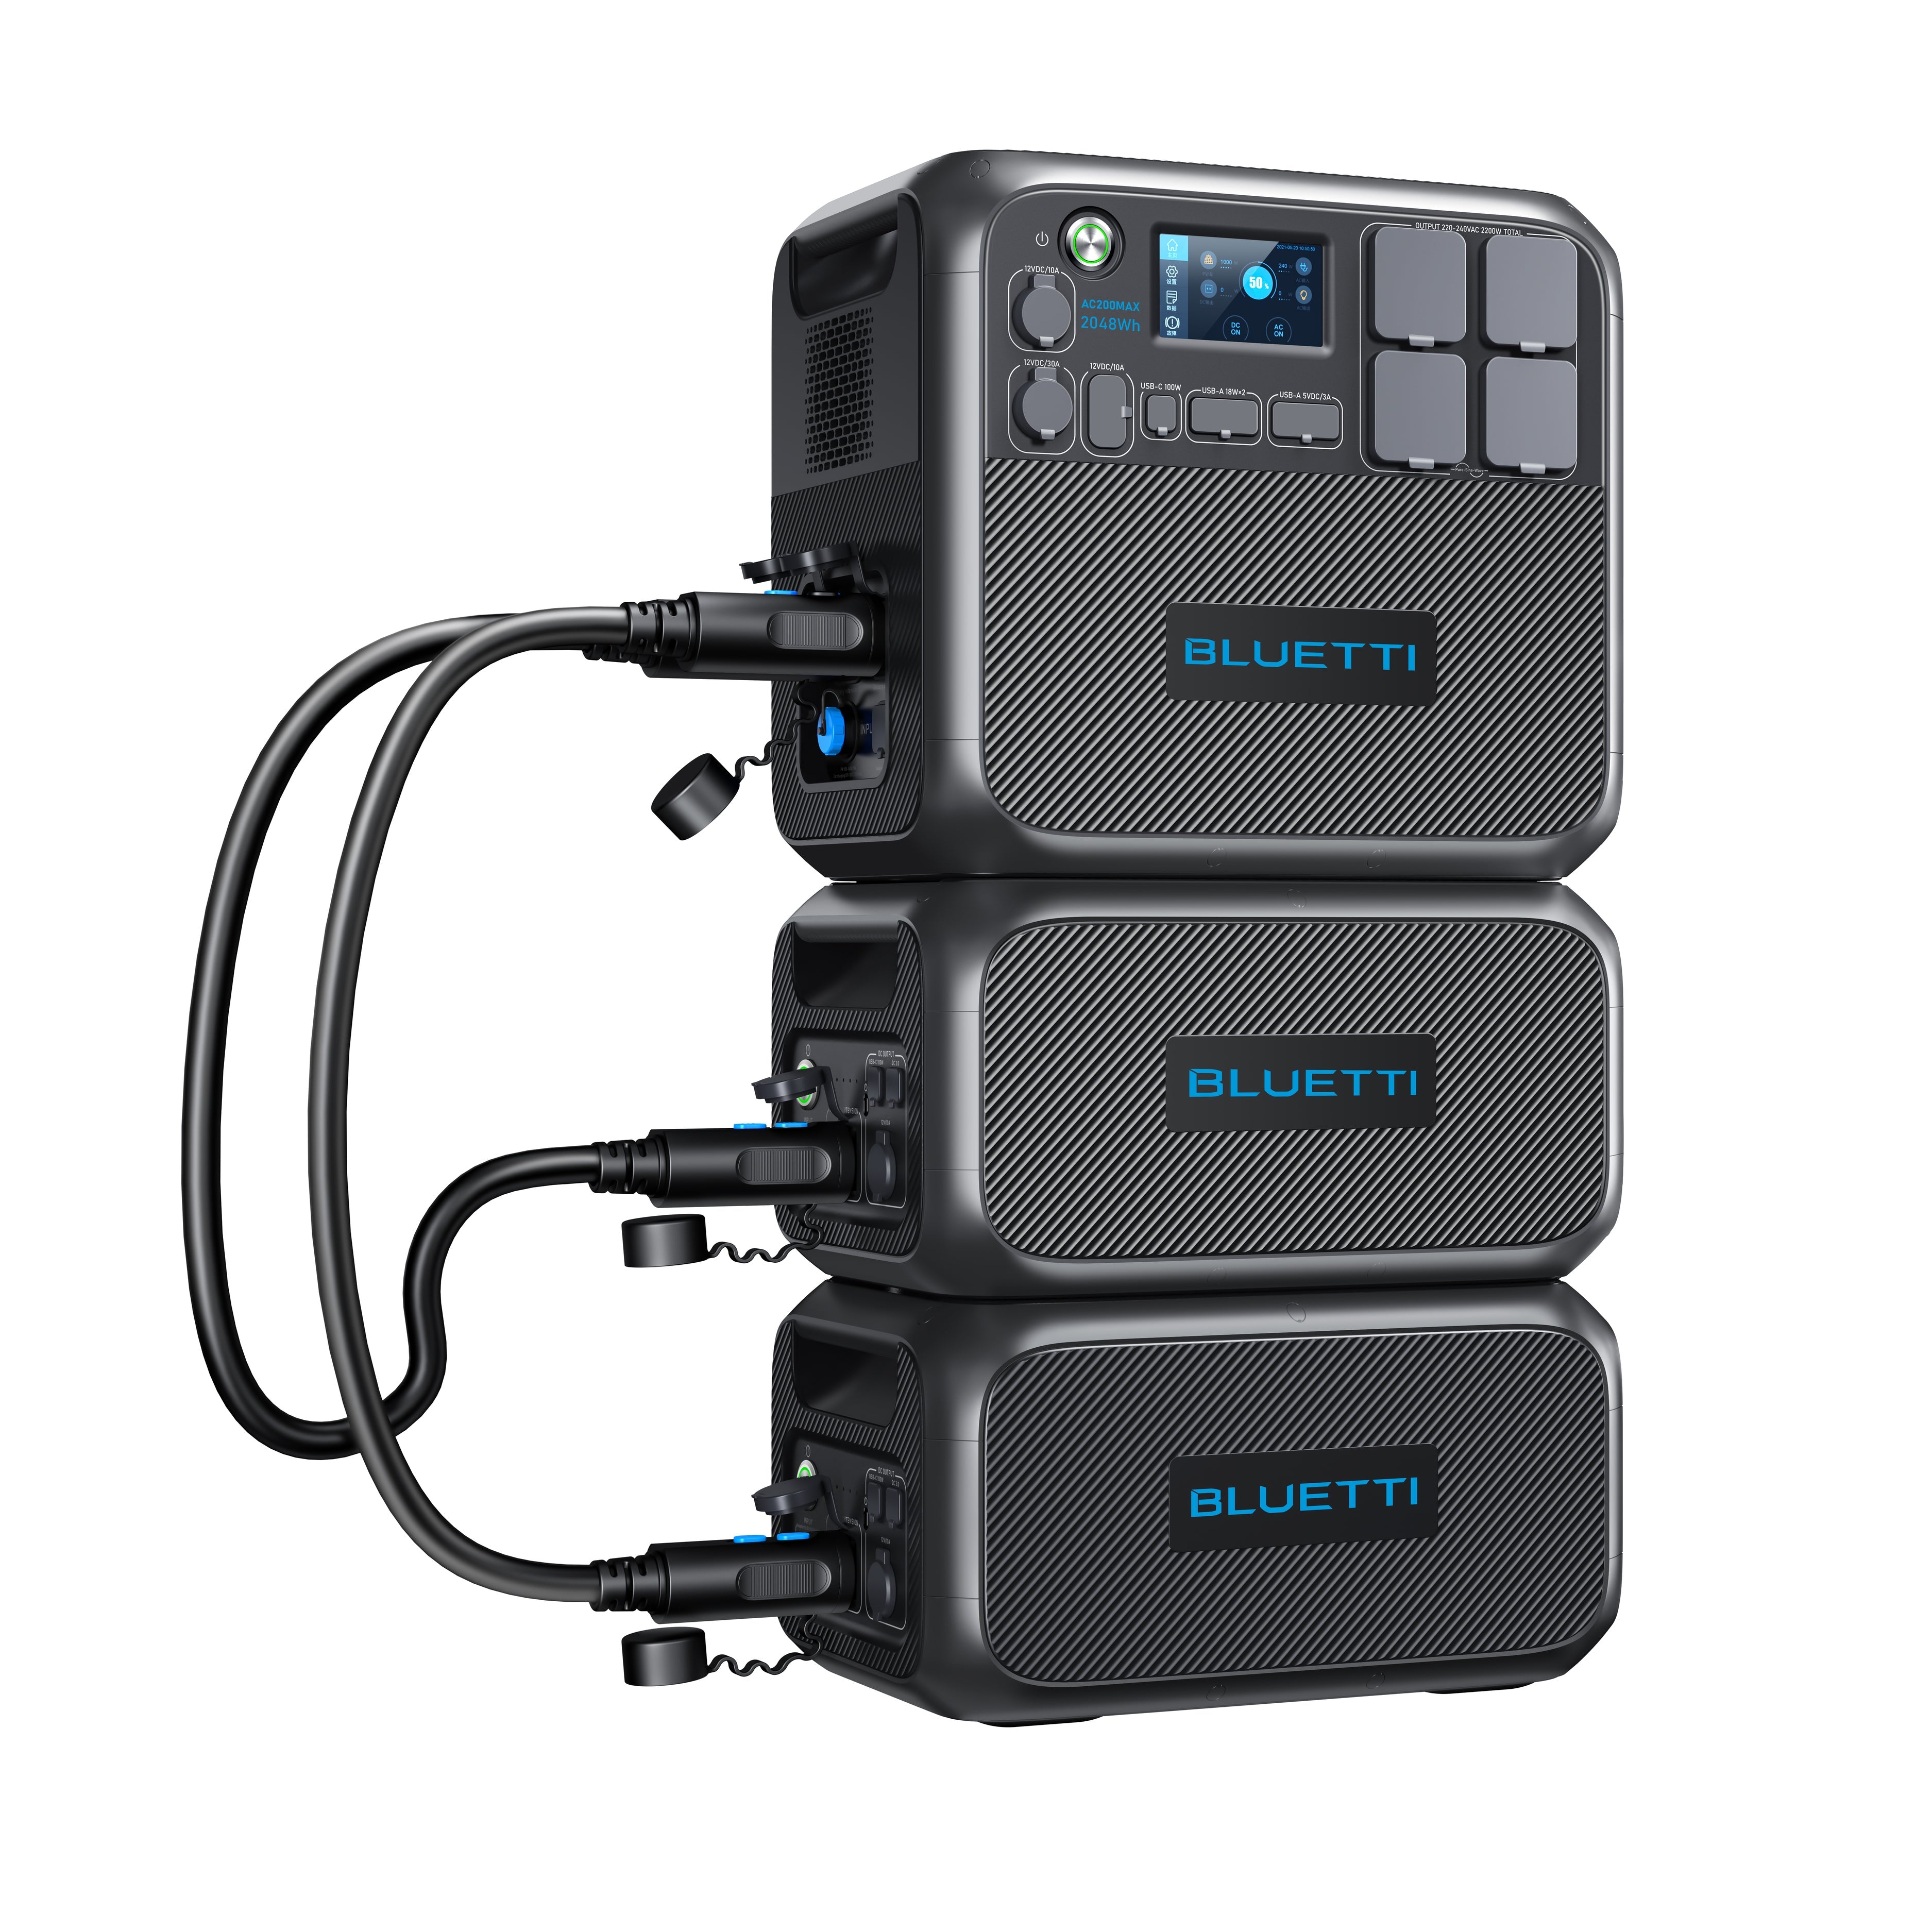 Bluetti B230 2048Wh Expansion Battery - Increased Capacity For Your Energy System